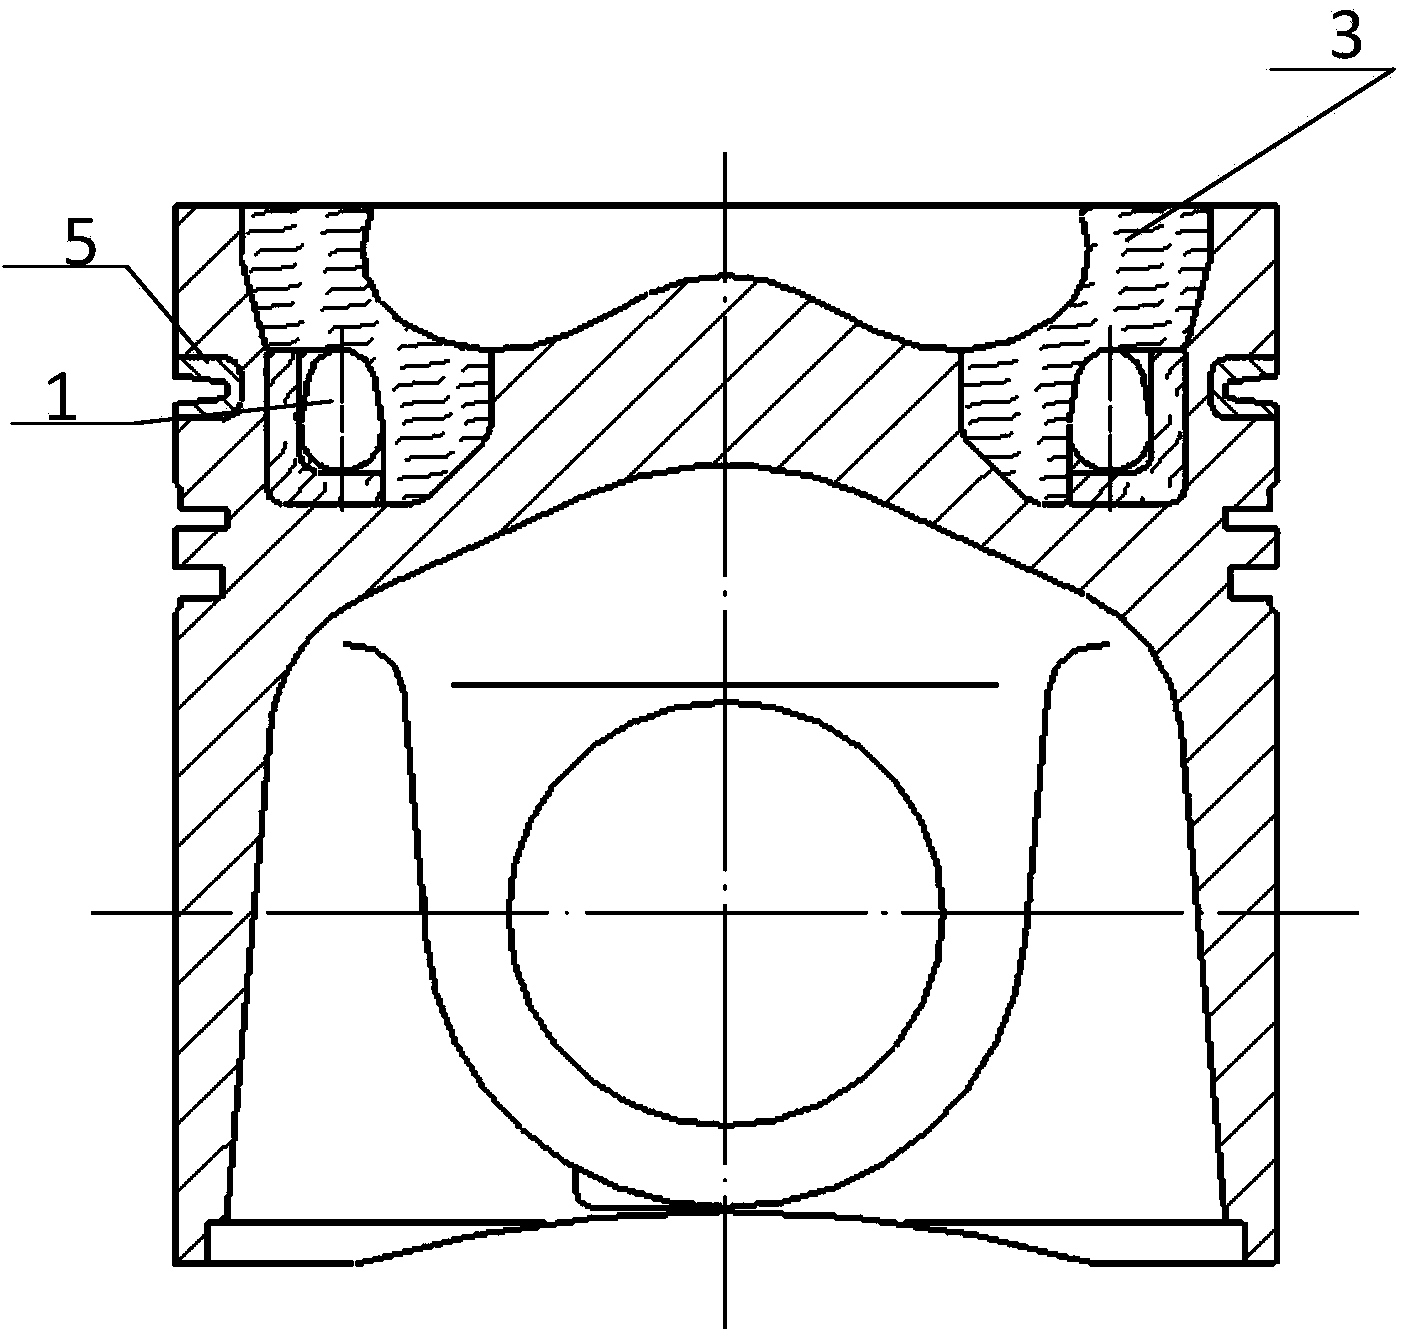 Method for manufacturing alumina fiber and titanium oxide particle-reinforced inner-cooling insert ring piston blanks